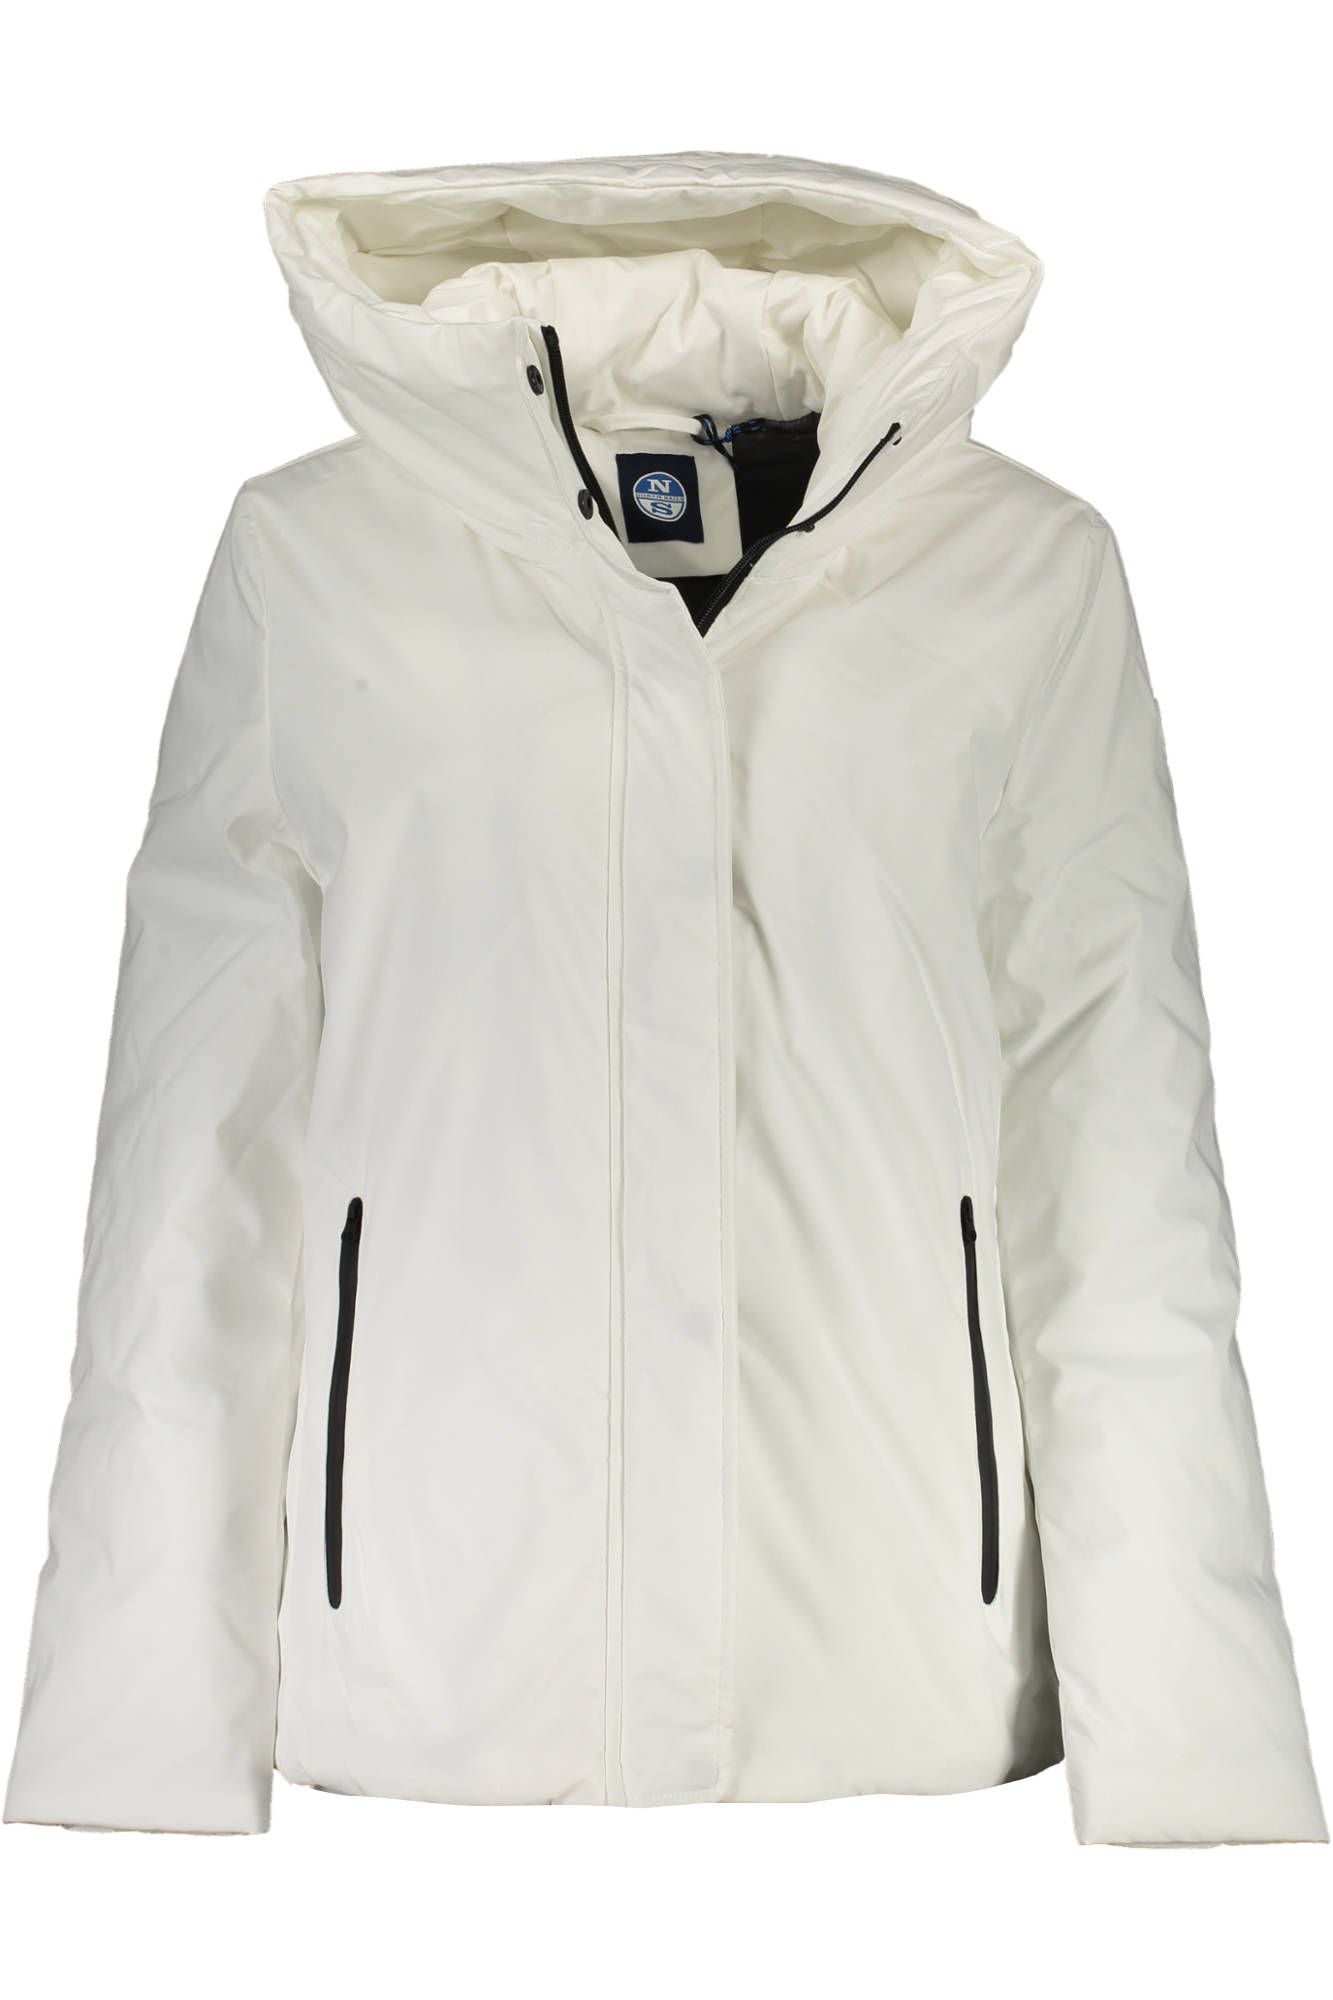 North Sails White Polyester Jackets & Coat